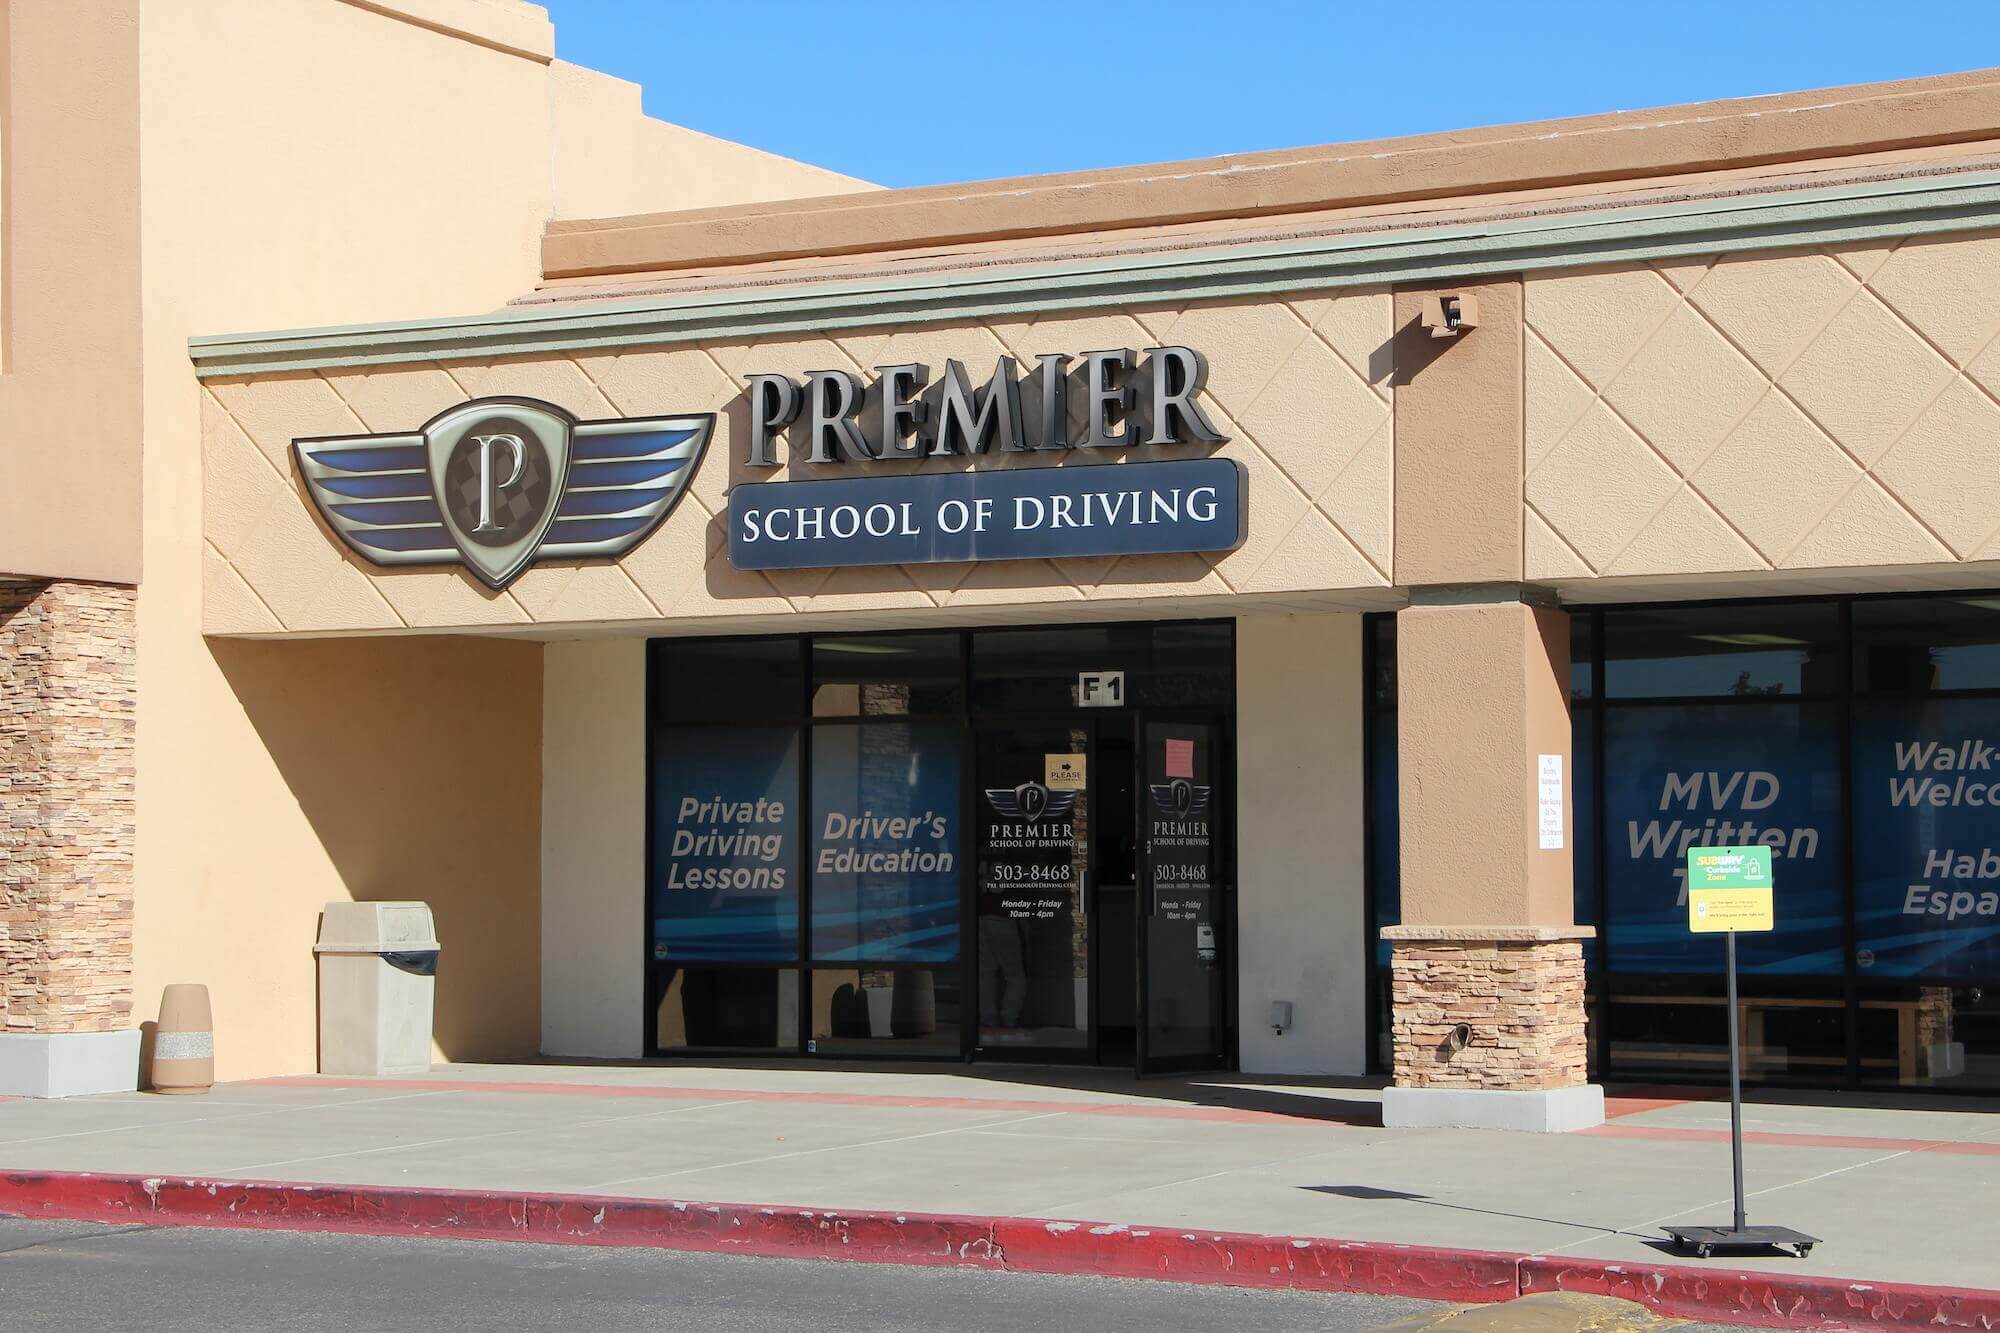 Picture of Premier School of Driving 3211 Coors Blvd SW f1, Albuquerque, NM 87121